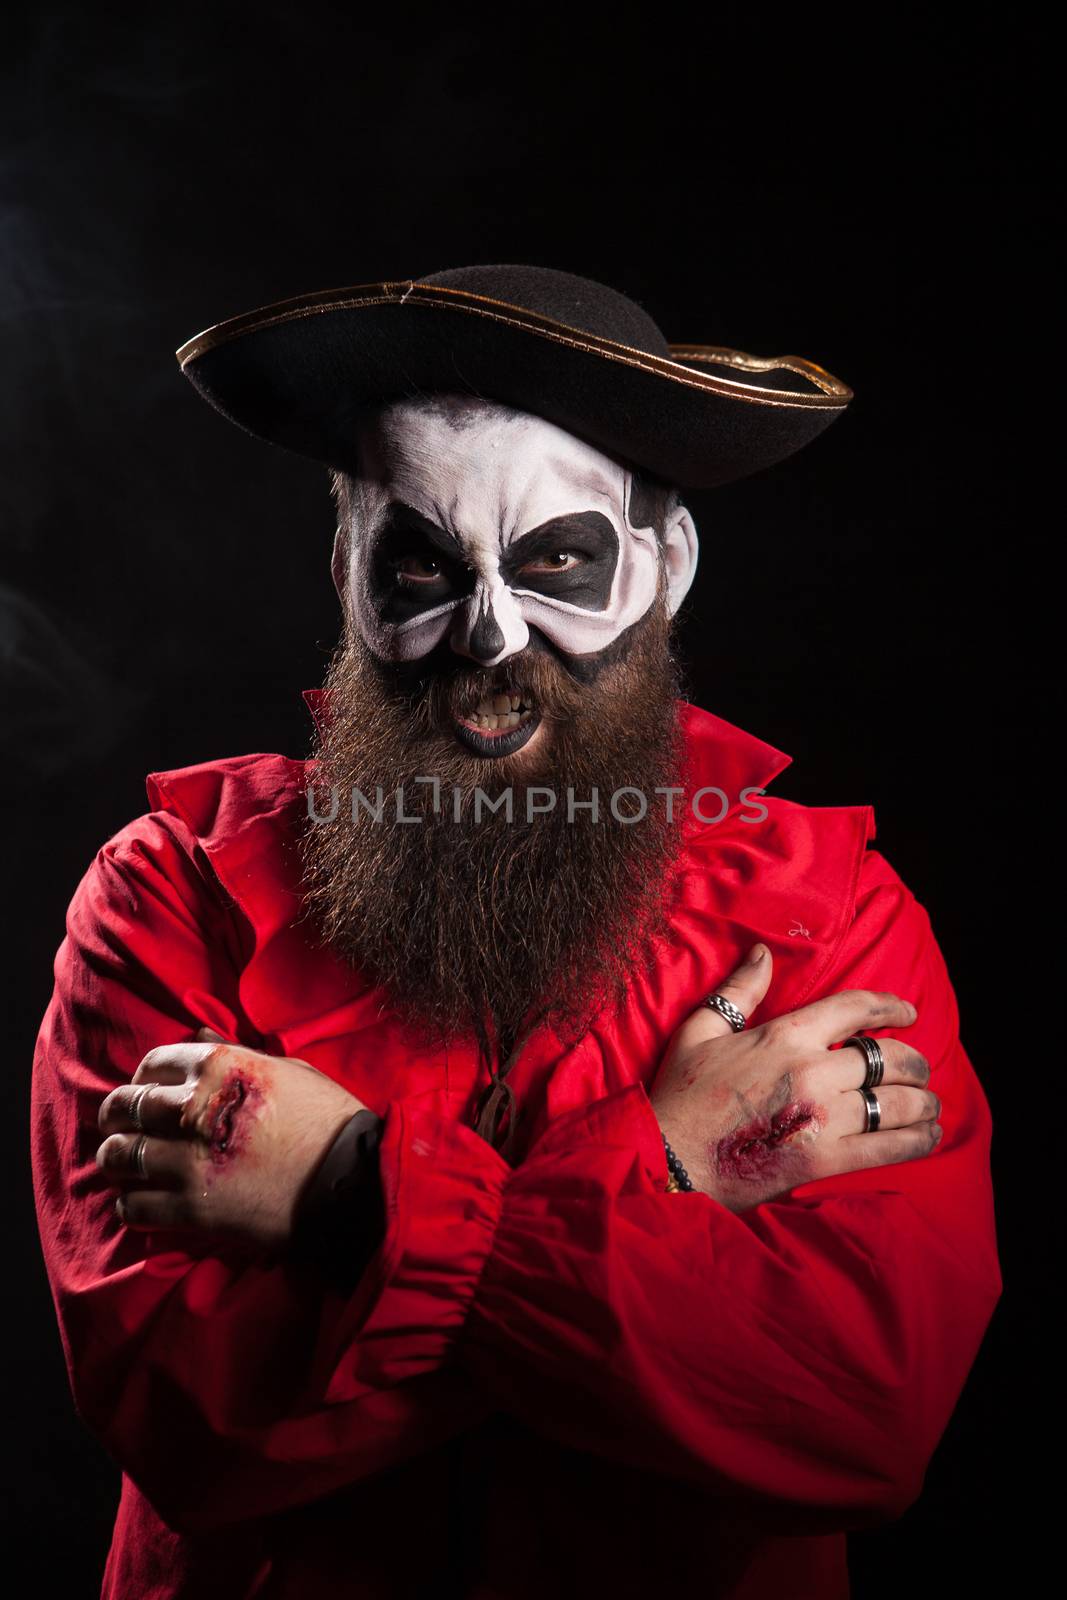 Evil bearded pirate with spooky makeup for halloween over black background.